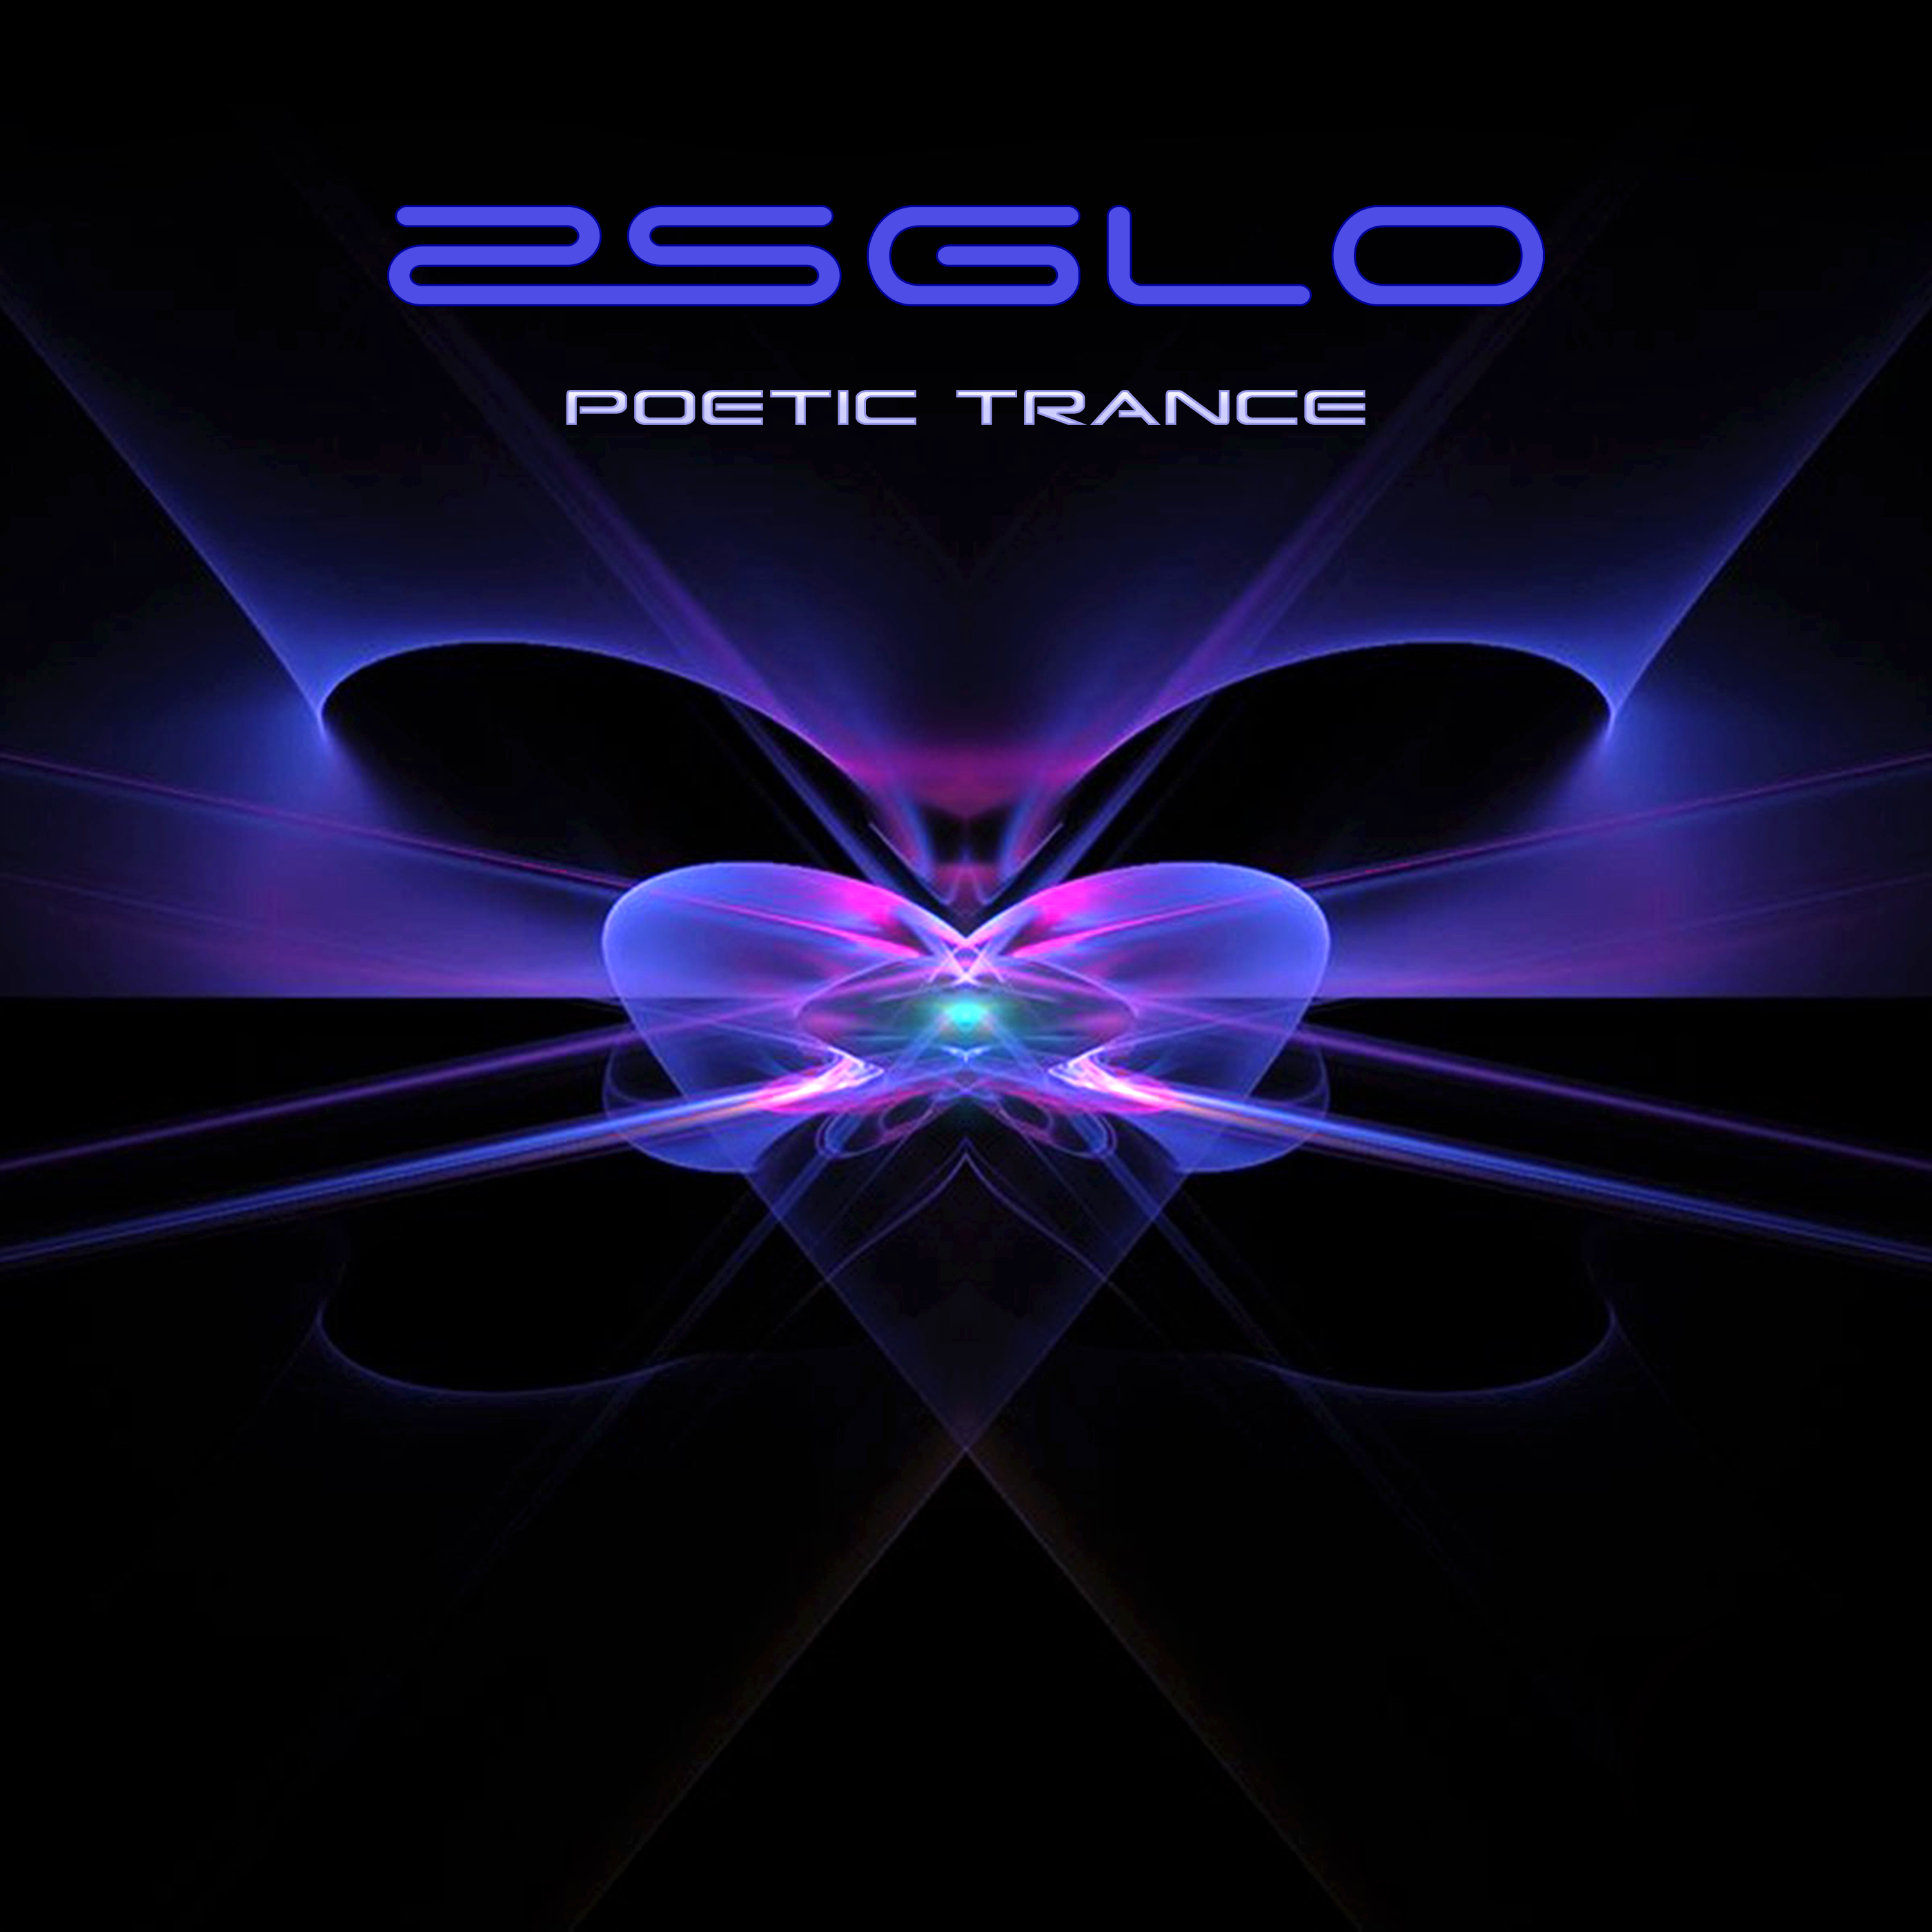 Listen To “Poetic Trance” By Esglo